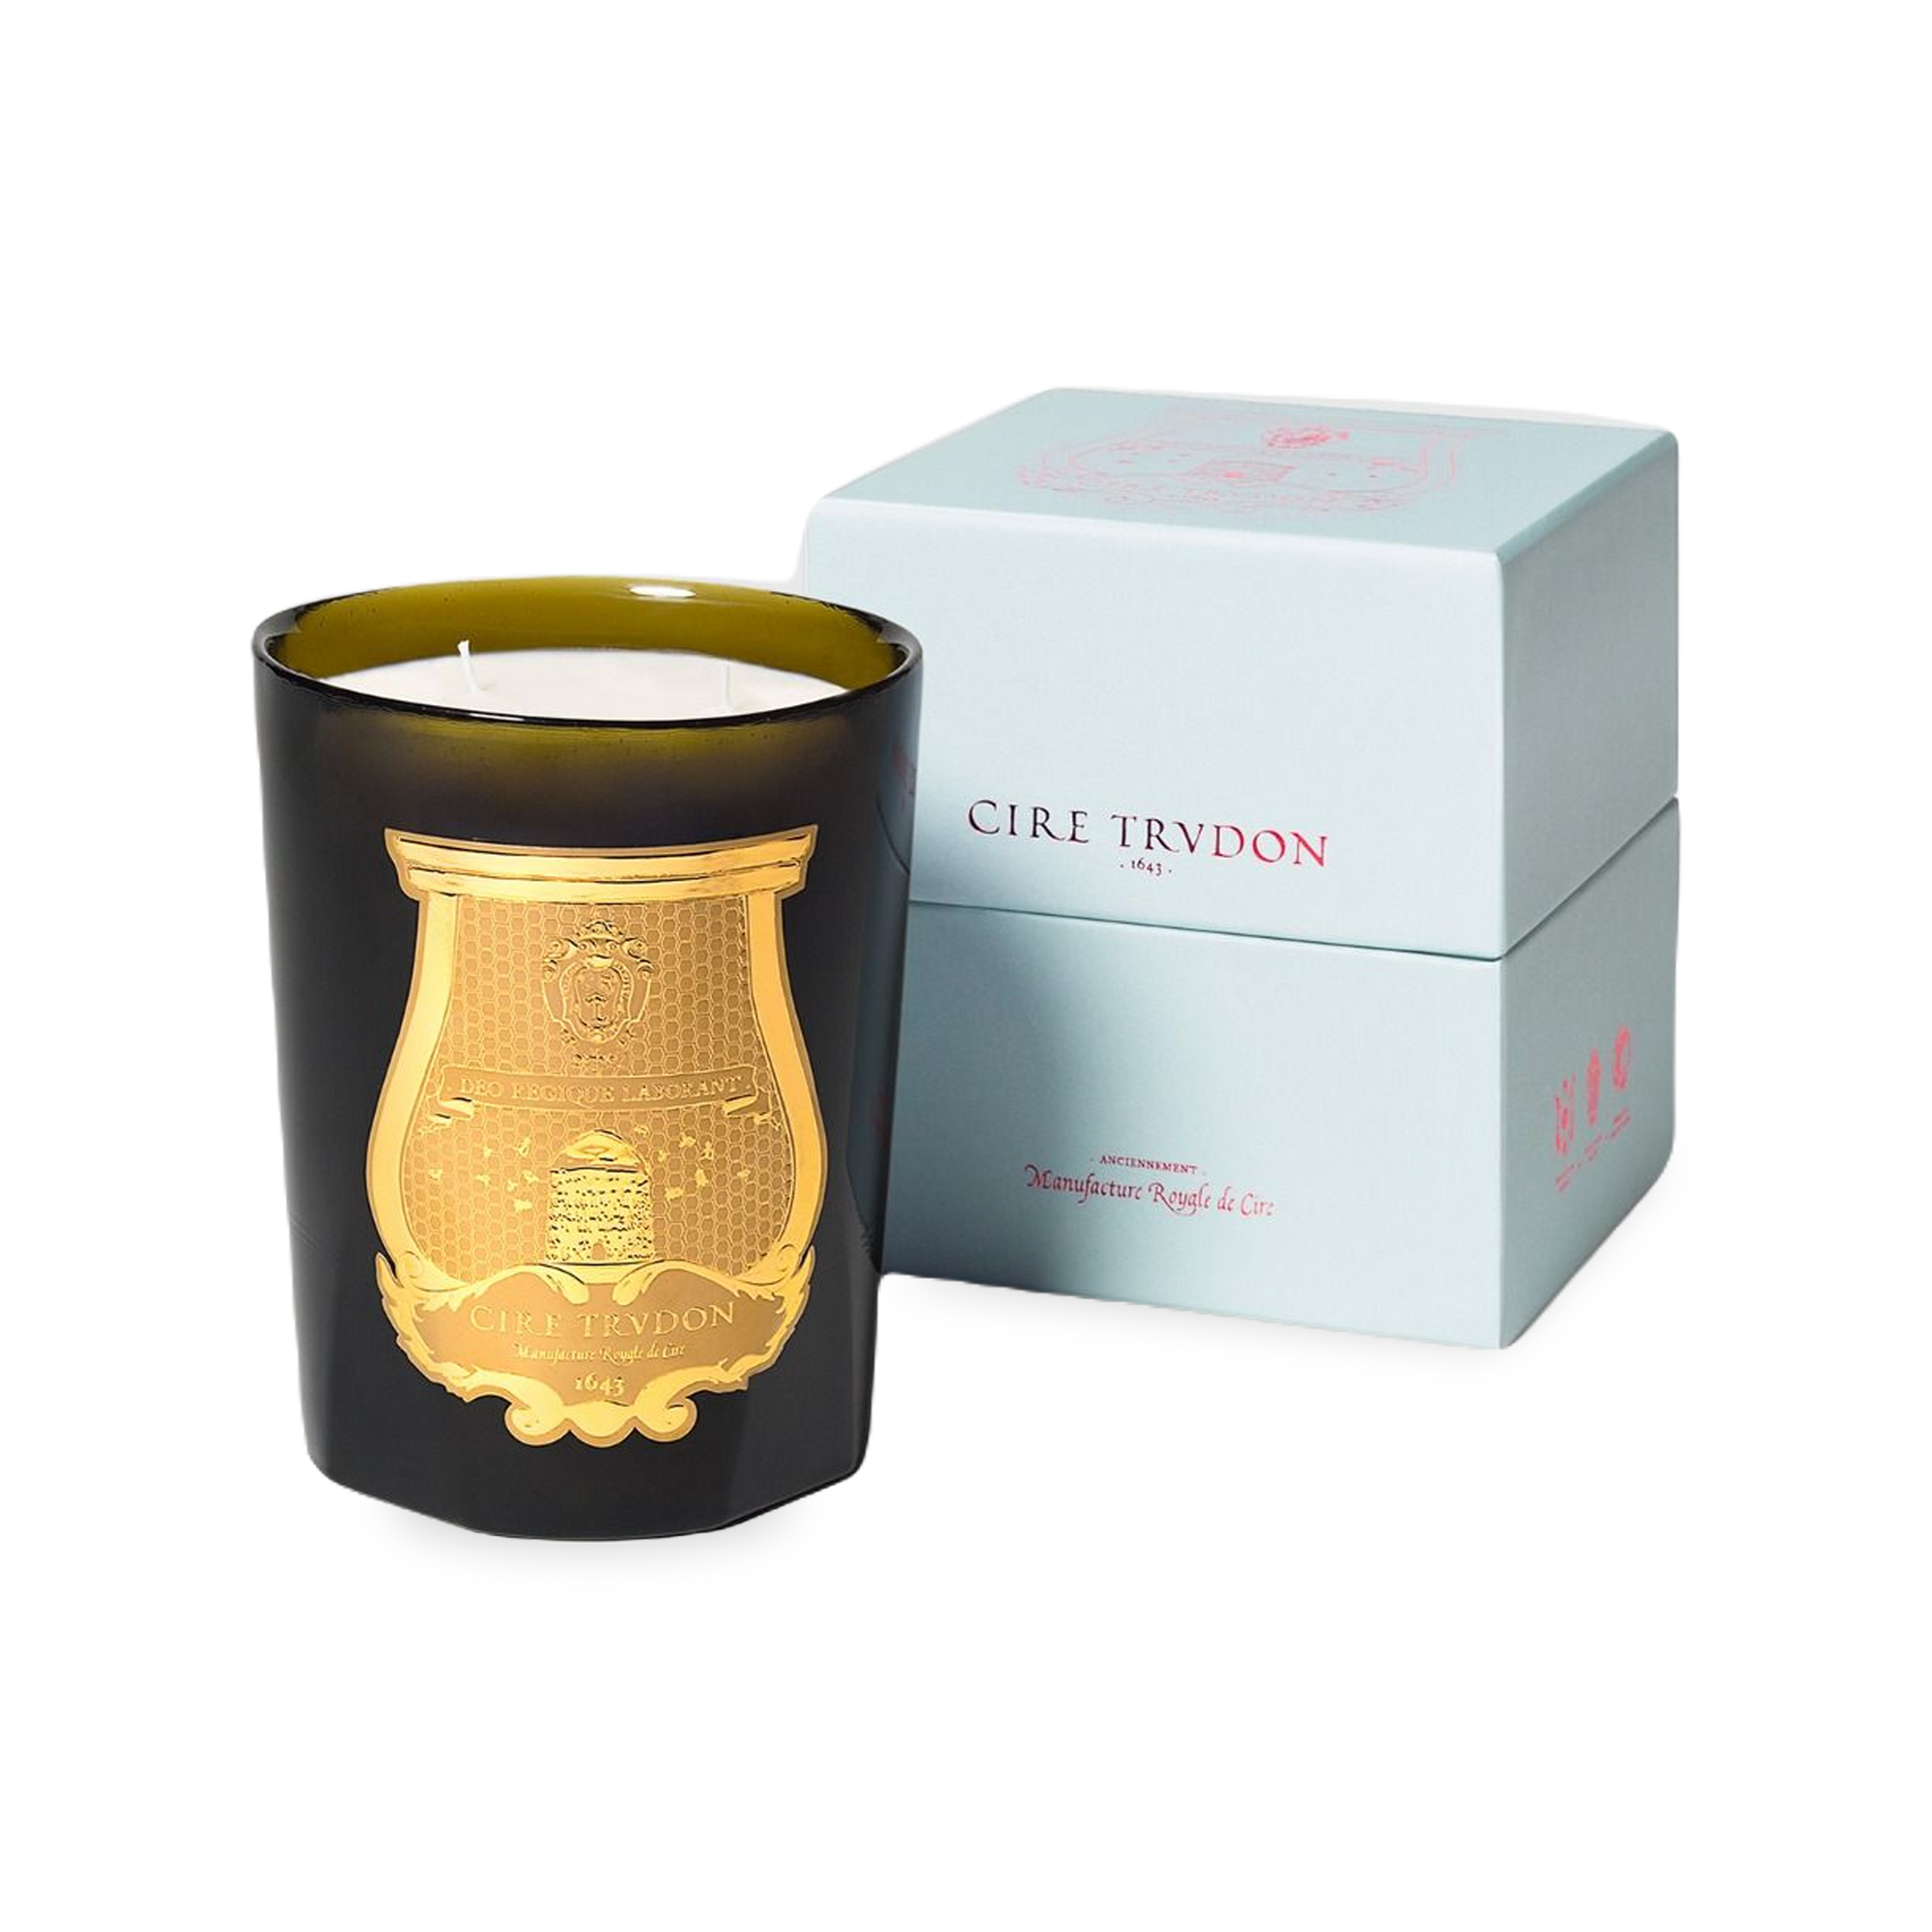 Manufactured at the Trudon workshop in Normandy France using unrivaled know-how inherited from master candle makers, the Cire Trudon Candle is the emblematic product of the histori